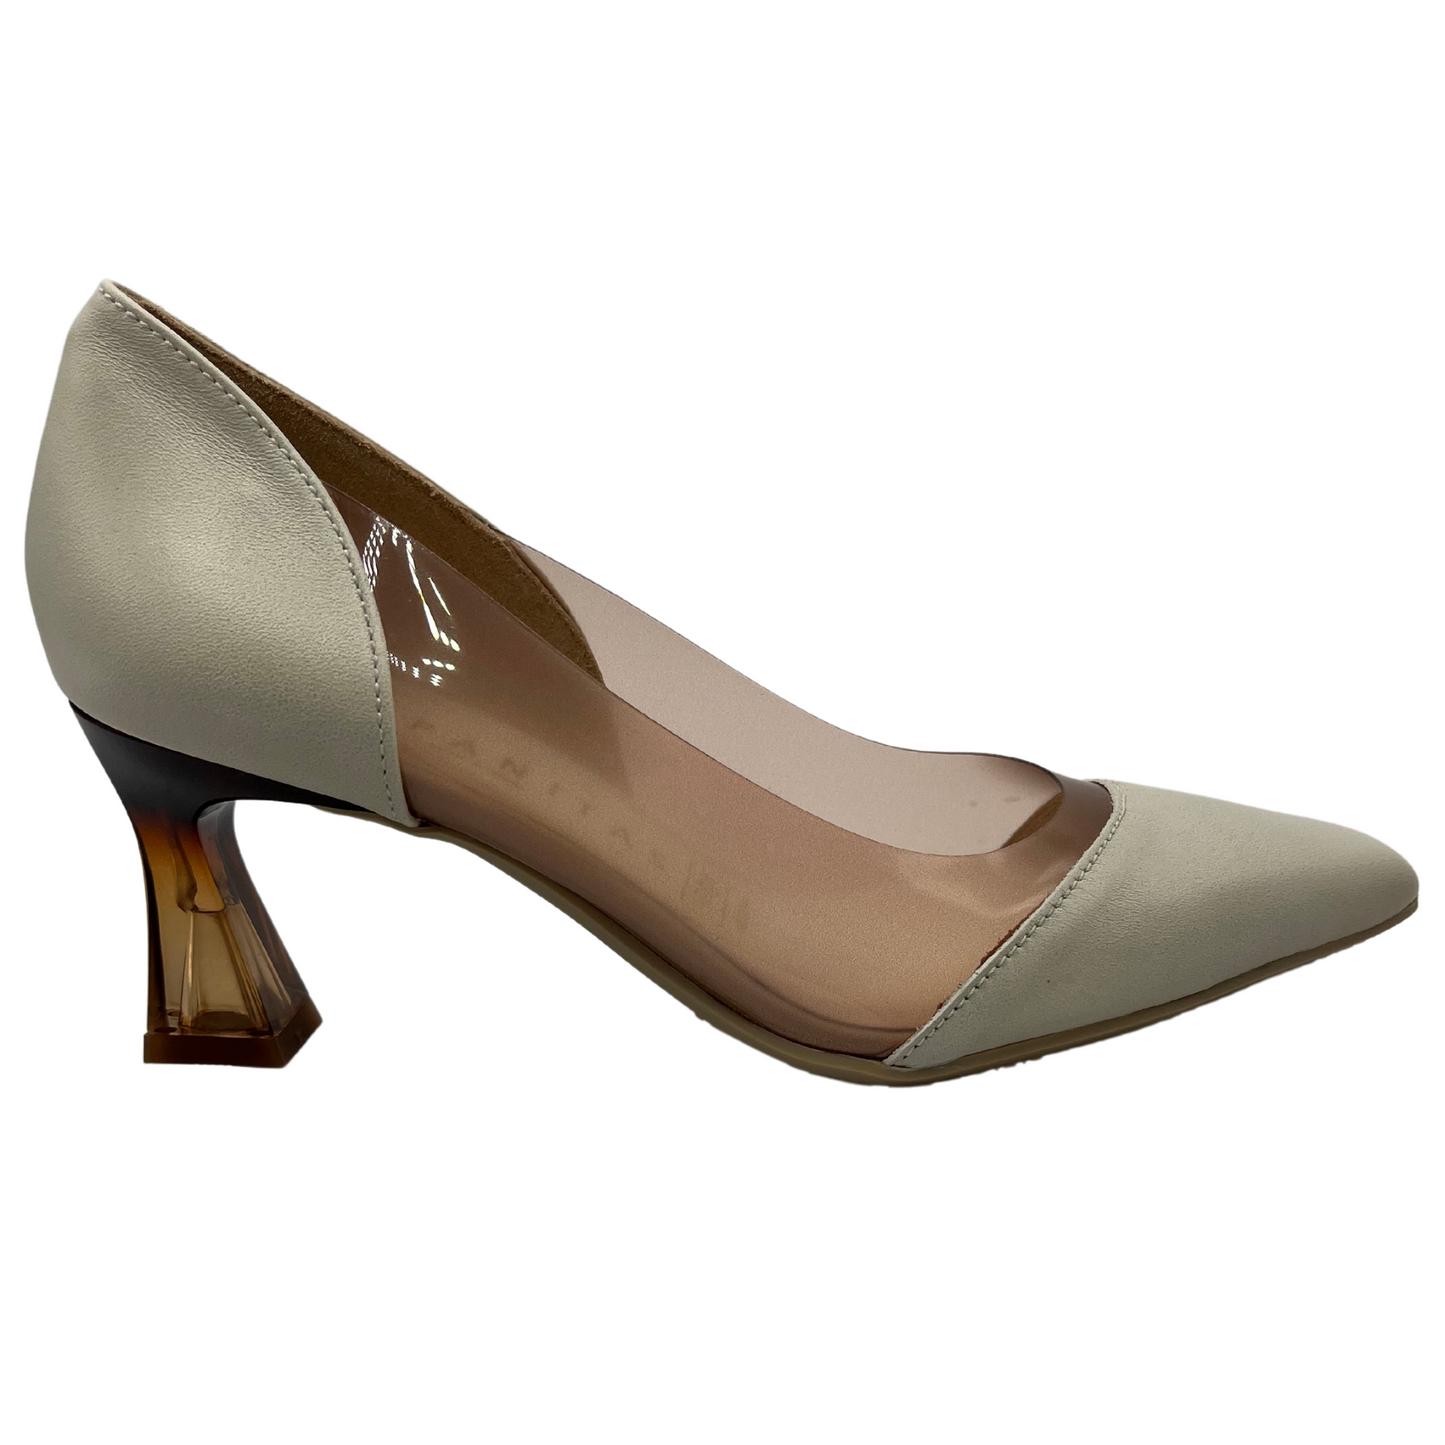 Right facing view of white and nude pump with pointed toe and flared heel